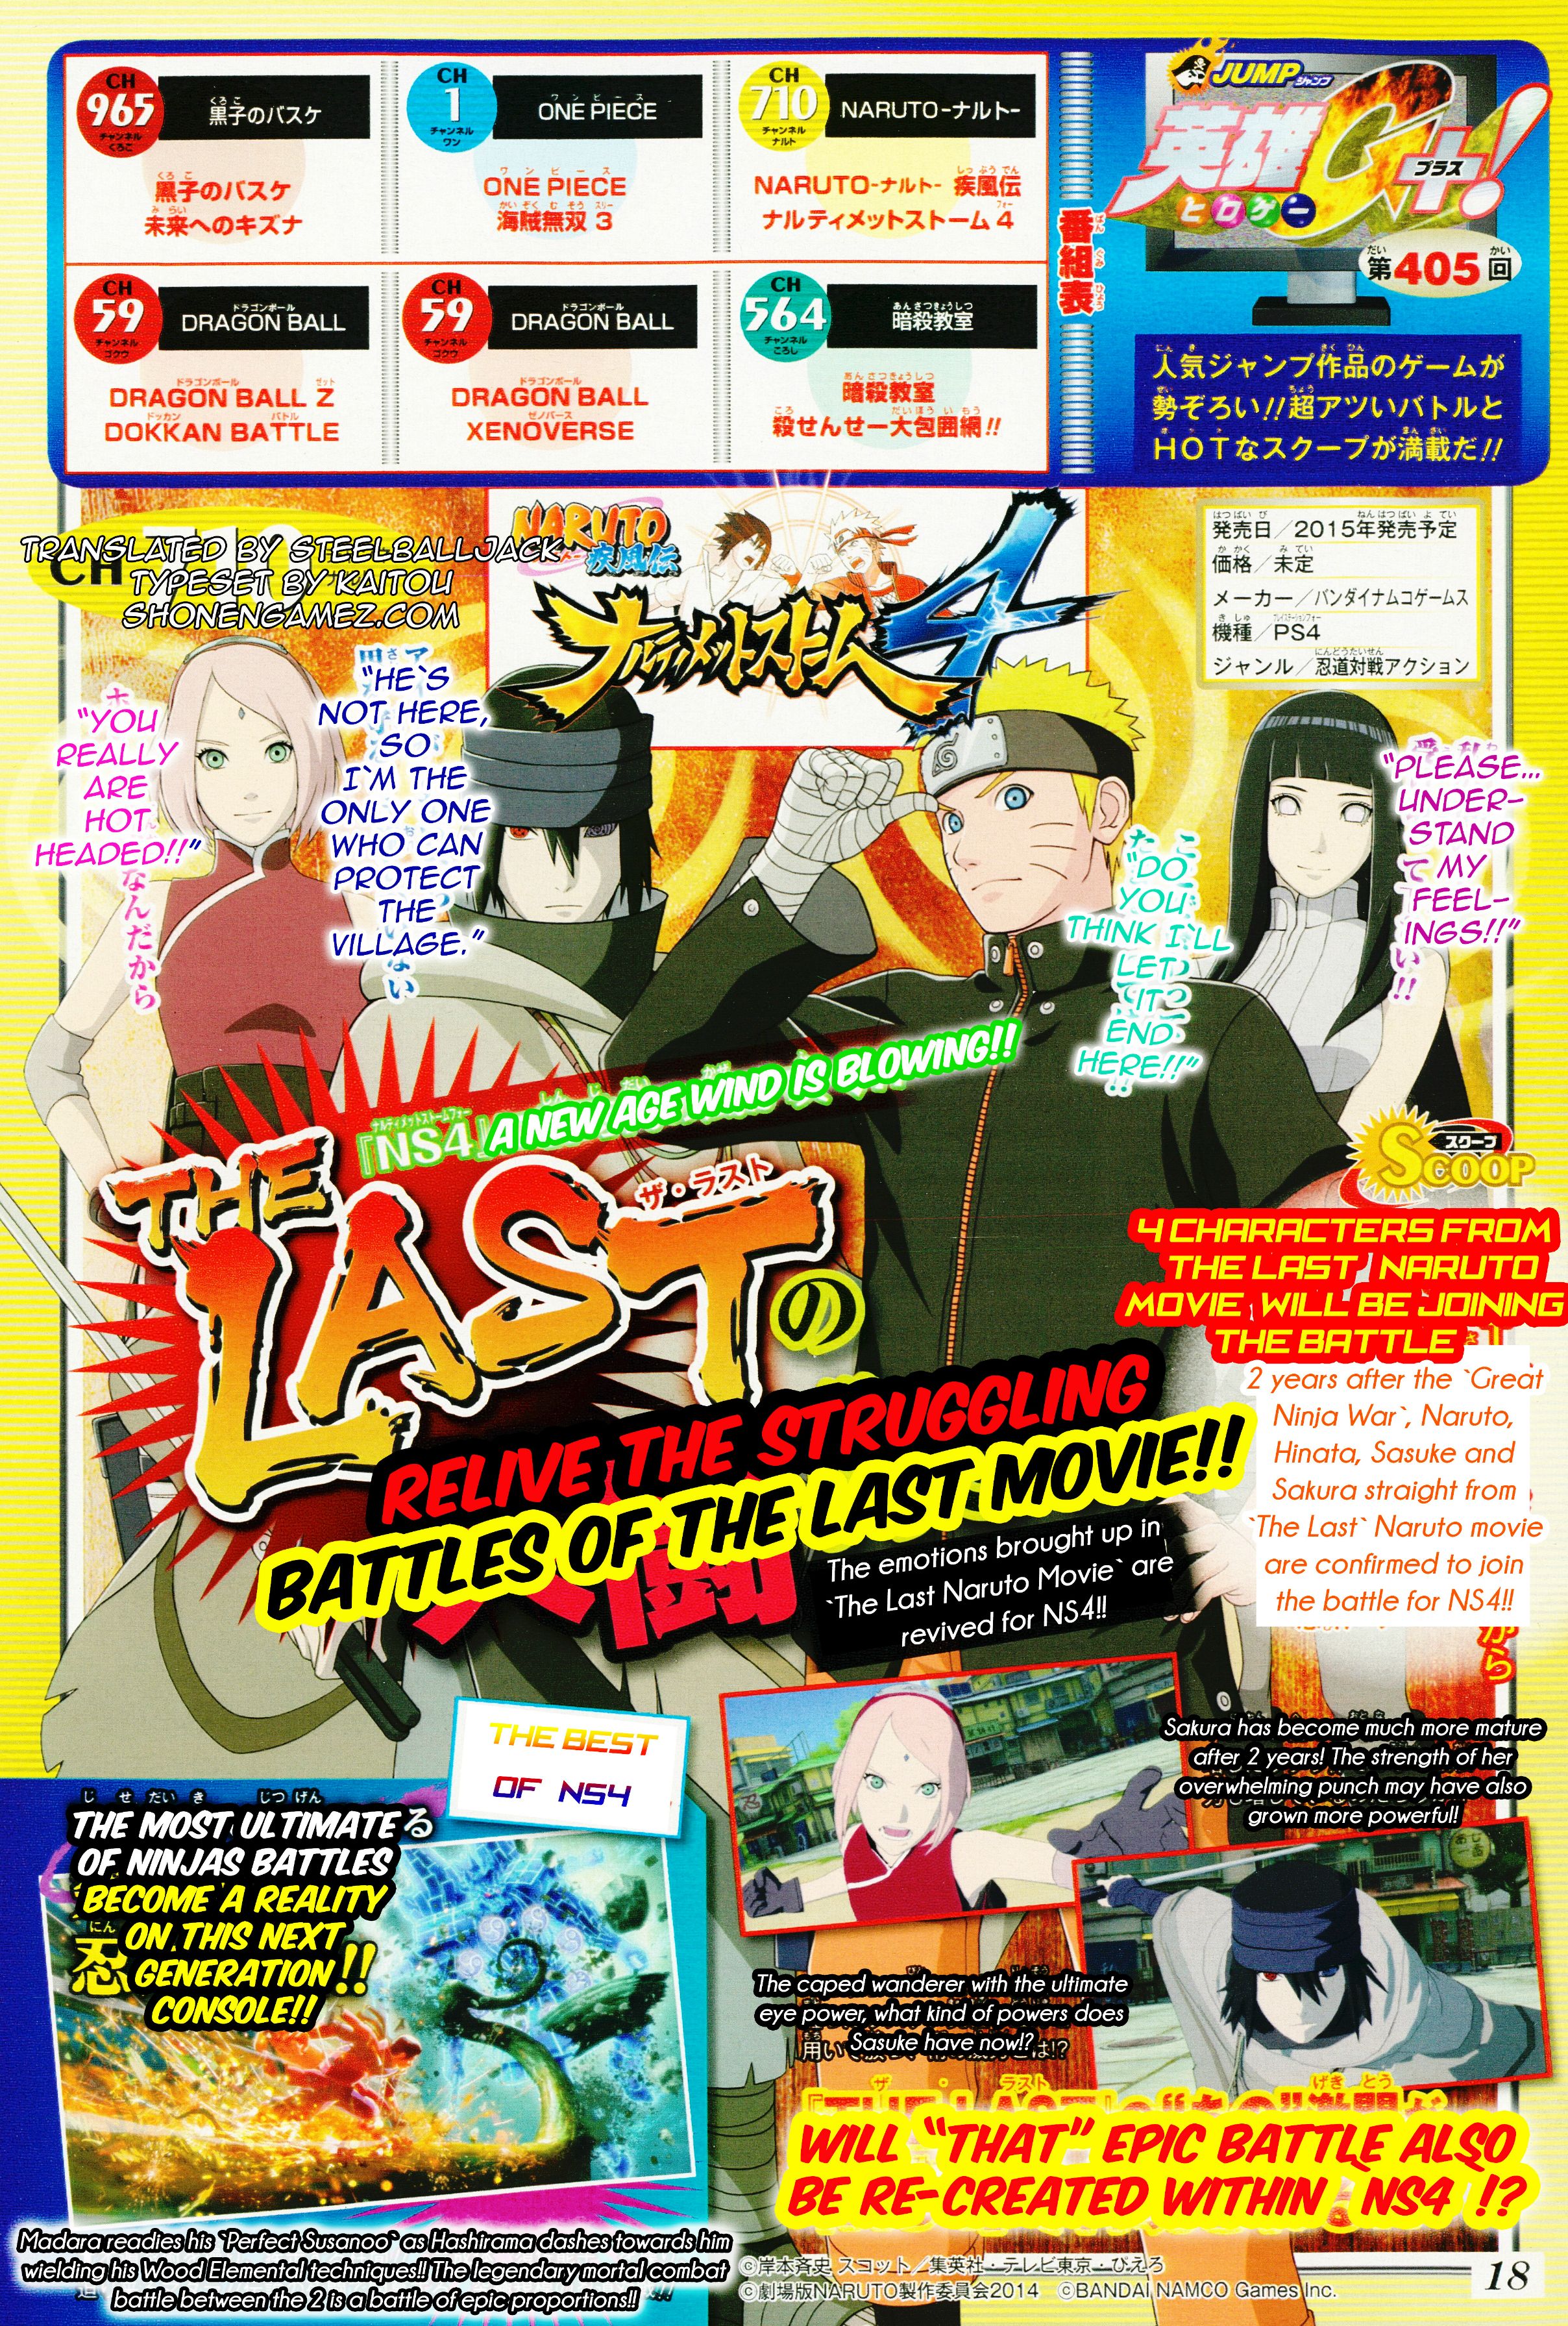 Naruto Shippuden: Ultimate Ninja Storm 4 Scan Features Four Characters